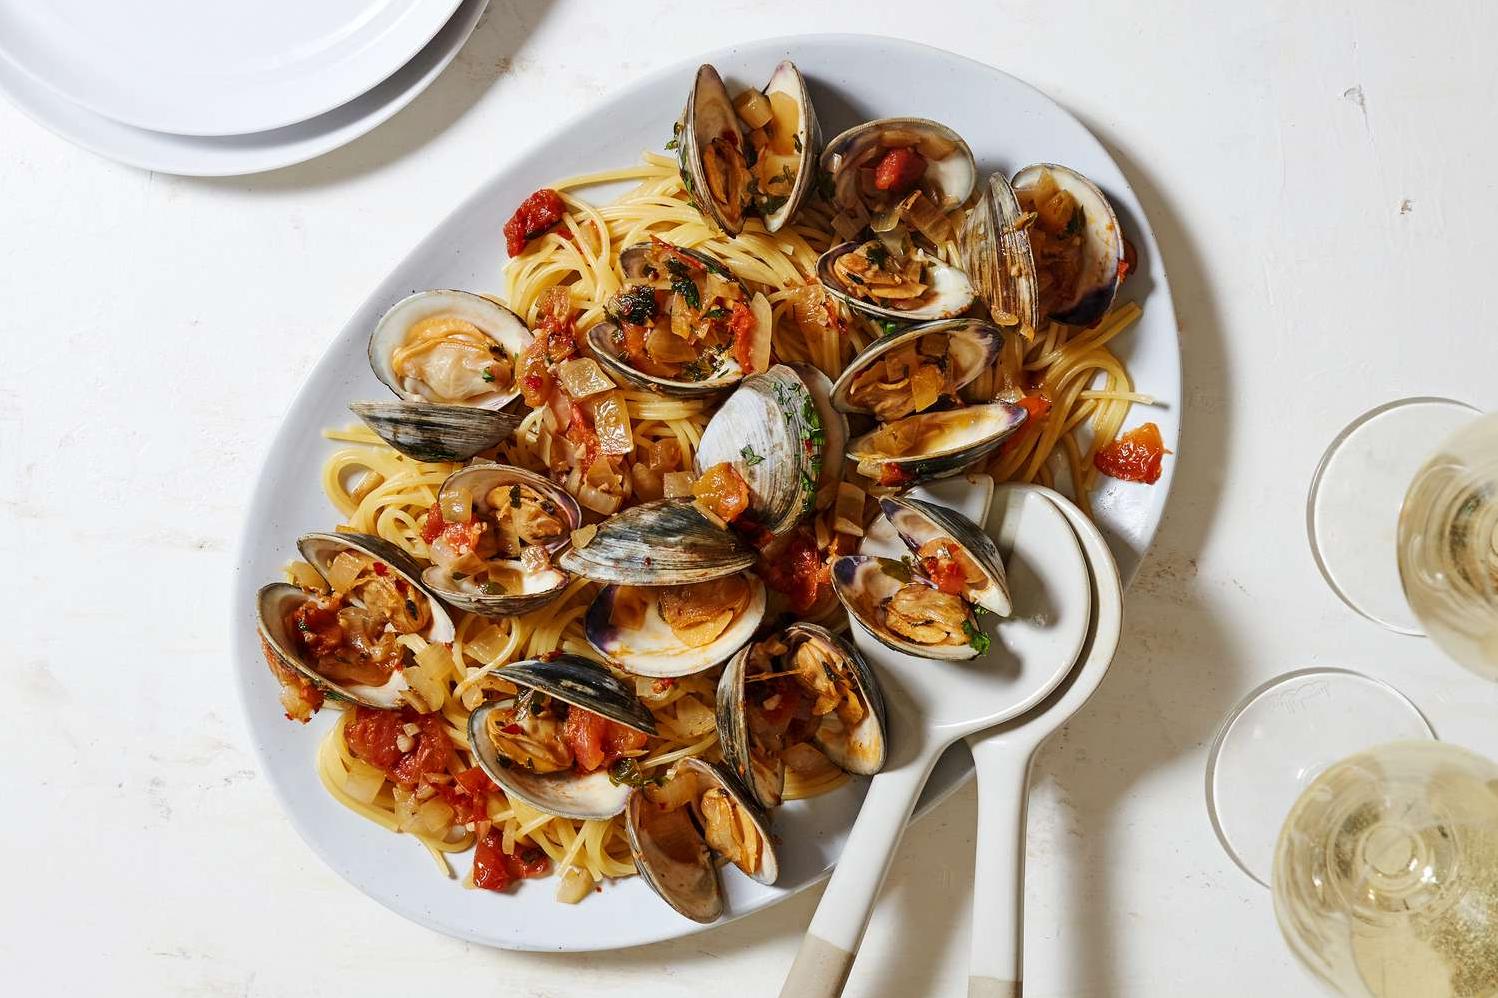  The perfect combination of briny clams, creamy linguine, and tangy garlic makes this pasta a mouth-watering delight.